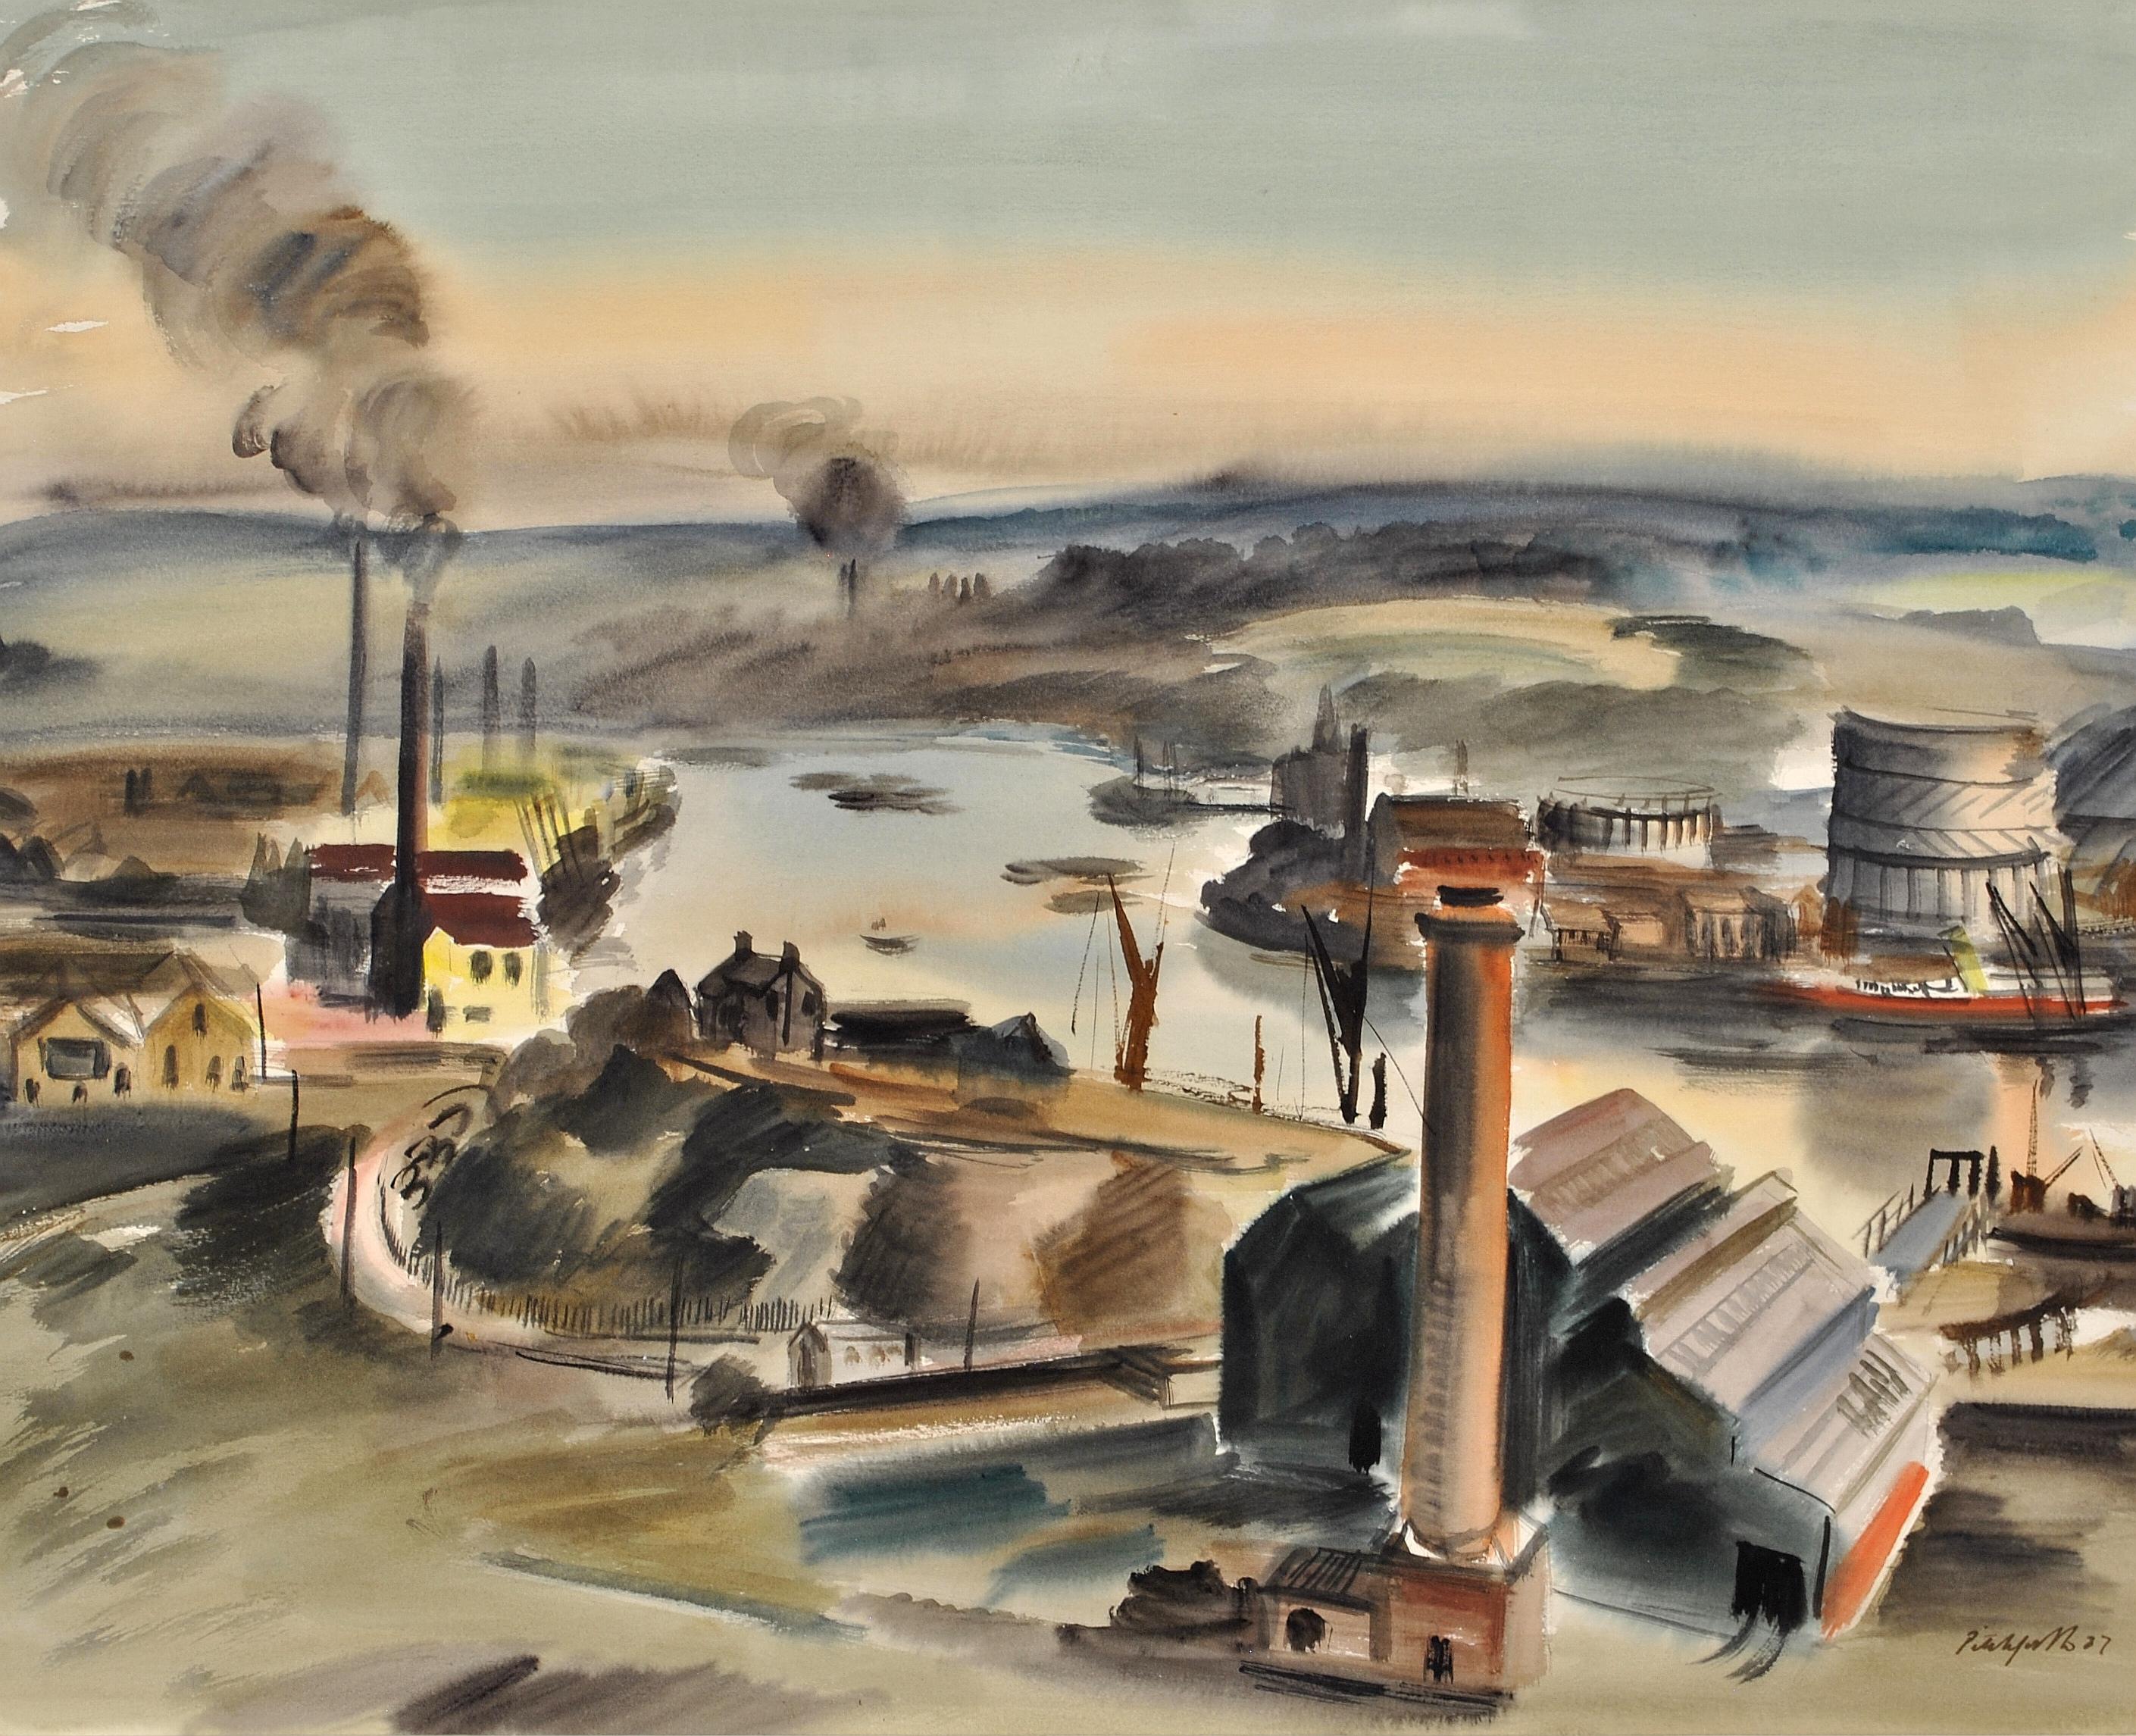 The Medway, Rochester - Large Modern British Kent Landscape Watercolor Painting - Art by Roland Vivian Pitchforth, RA, ARWS